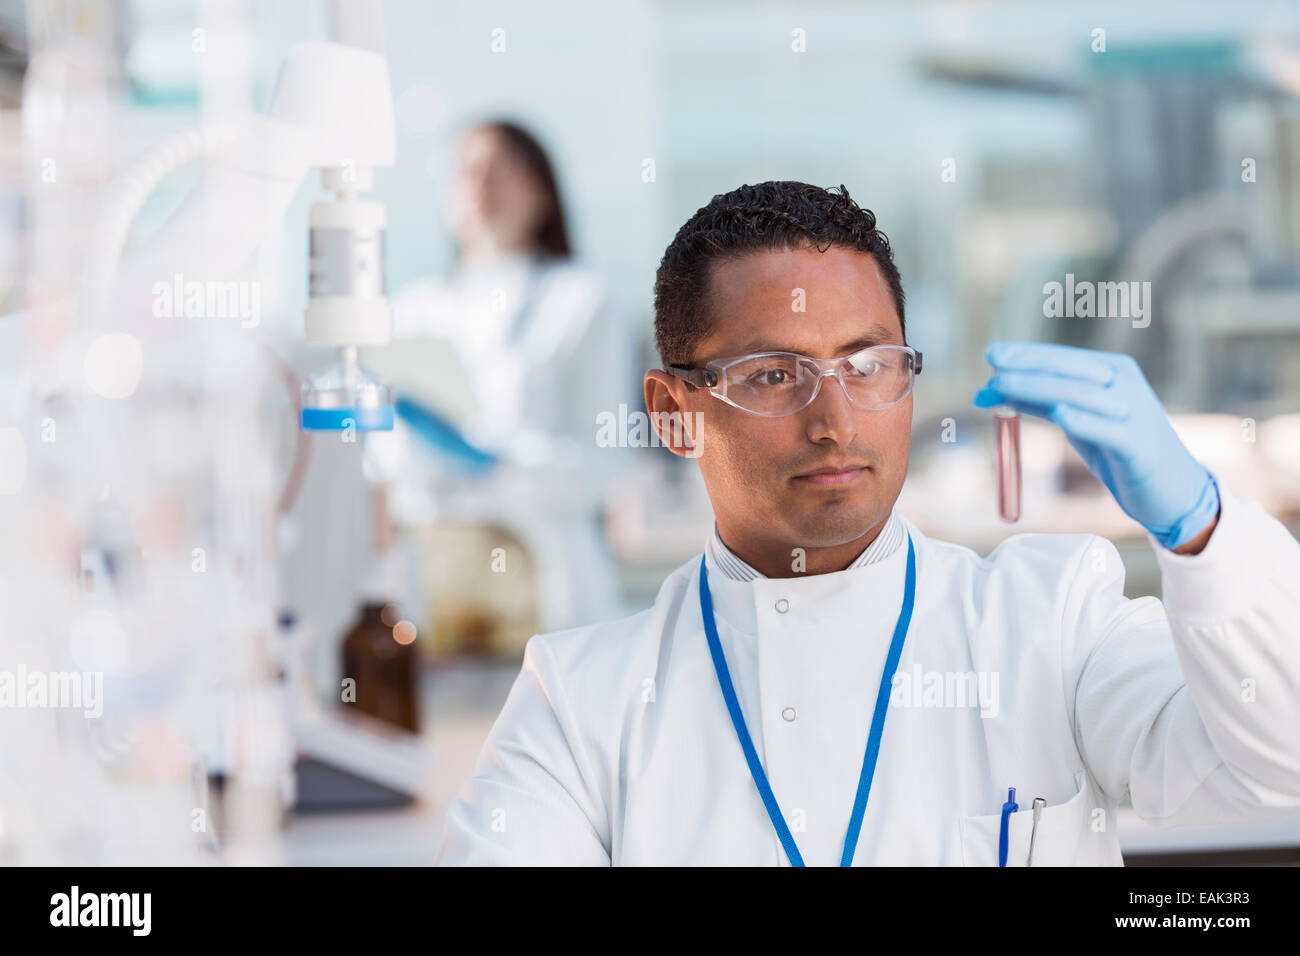 Scientist examining test tube in laboratory Banque D'Images